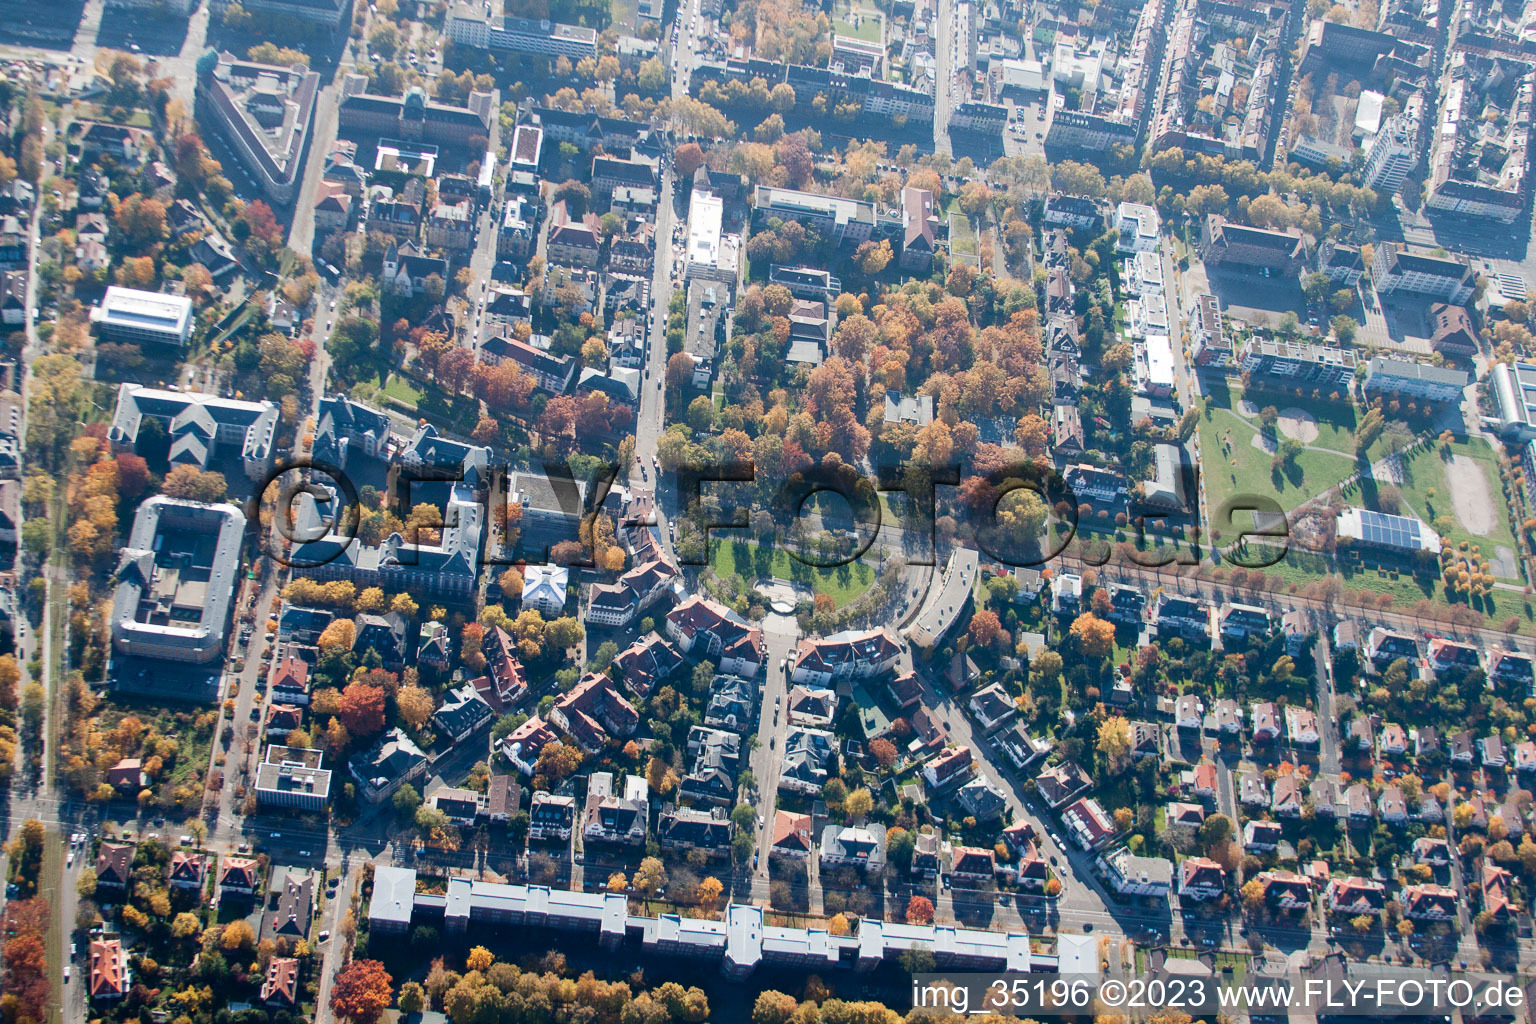 District Mühlburg in Karlsruhe in the state Baden-Wuerttemberg, Germany seen from a drone